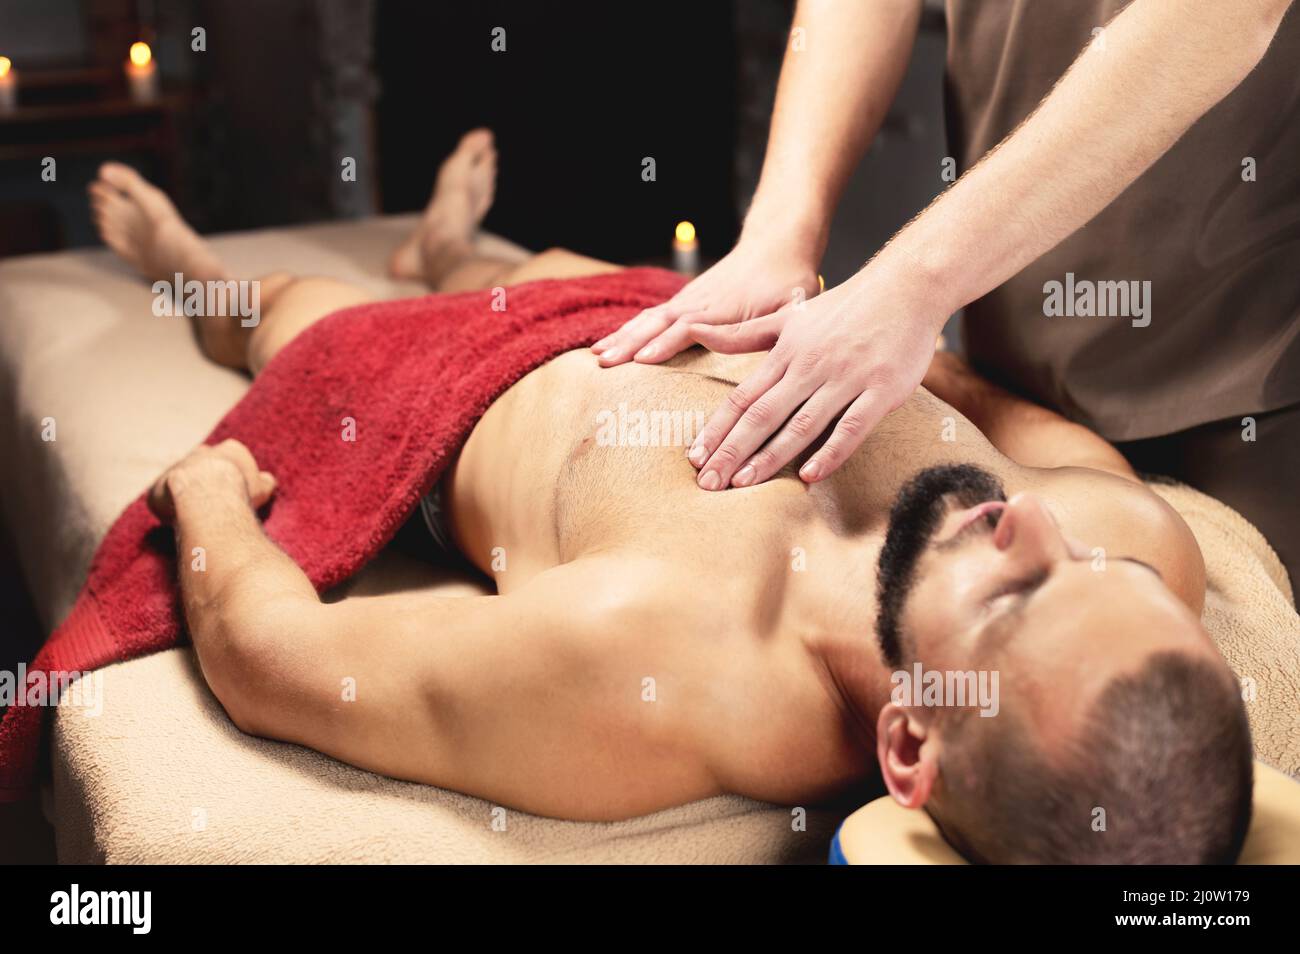 https://c8.alamy.com/comp/2J0W179/a-professional-therapist-massages-the-pectoral-muscle-of-an-athlete-to-a-man-in-a-professional-massage-salon-the-concept-of-pro-2J0W179.jpg